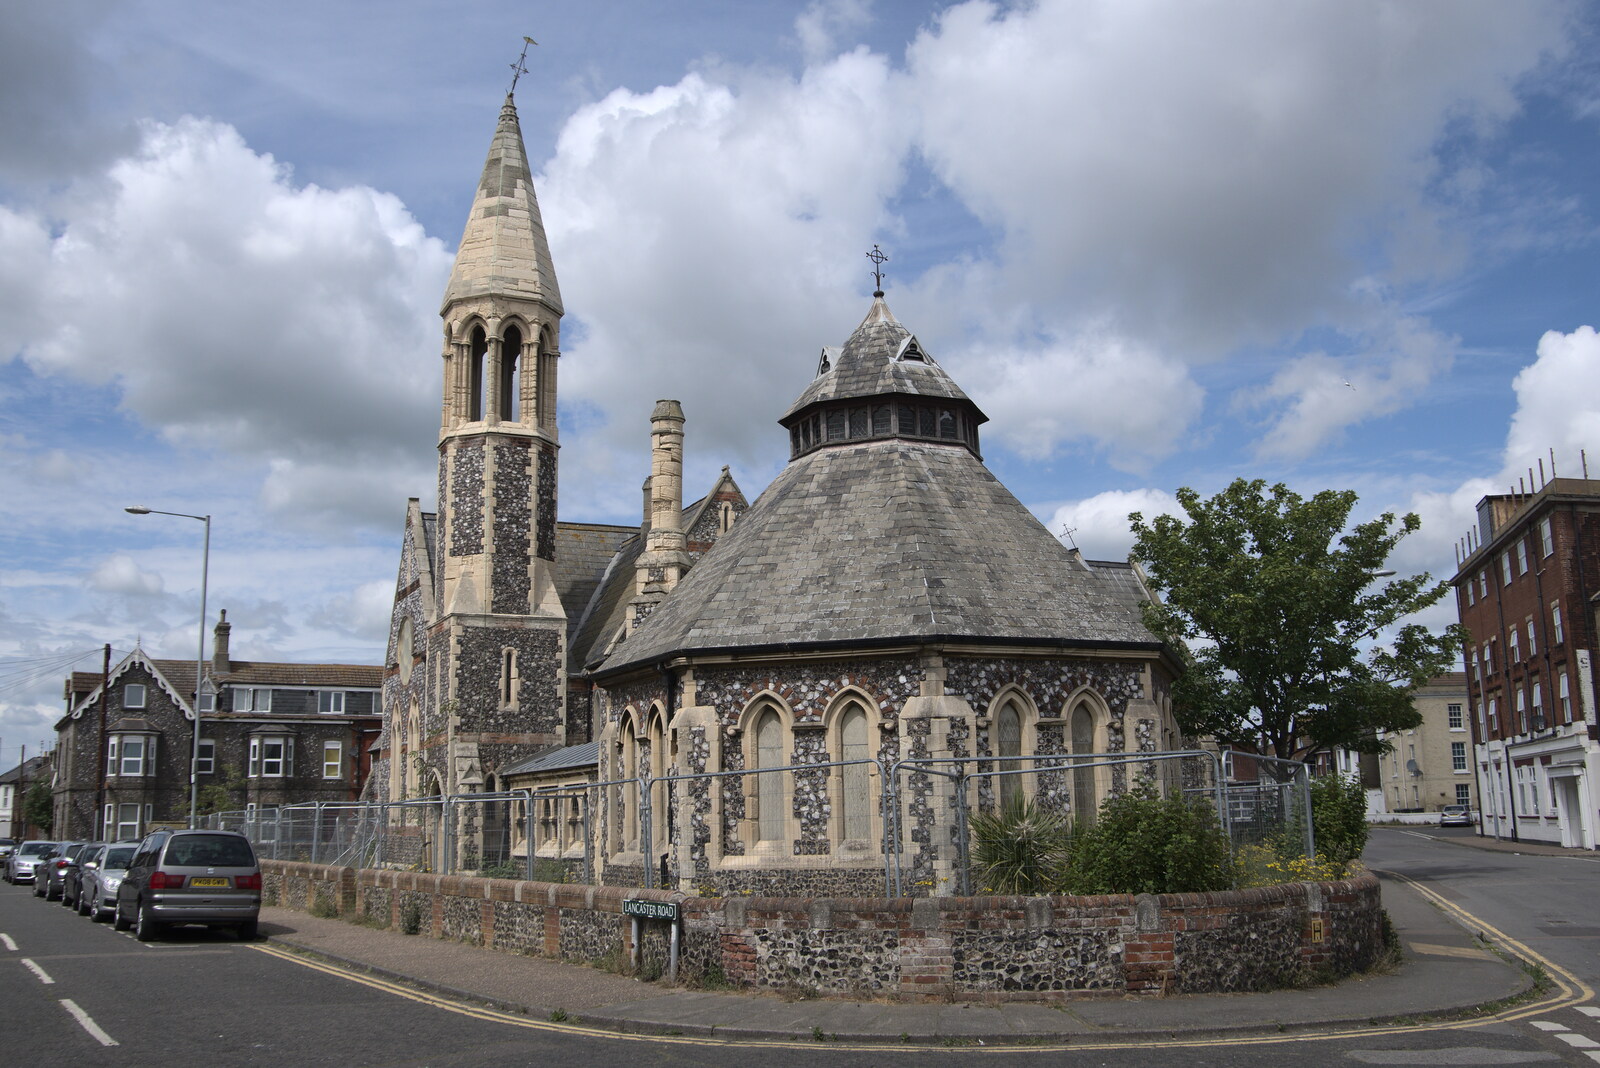 The old St. John's church from Faded Seaside Glamour: A Weekend in Great Yarmouth, Norfolk - 29th May 2022